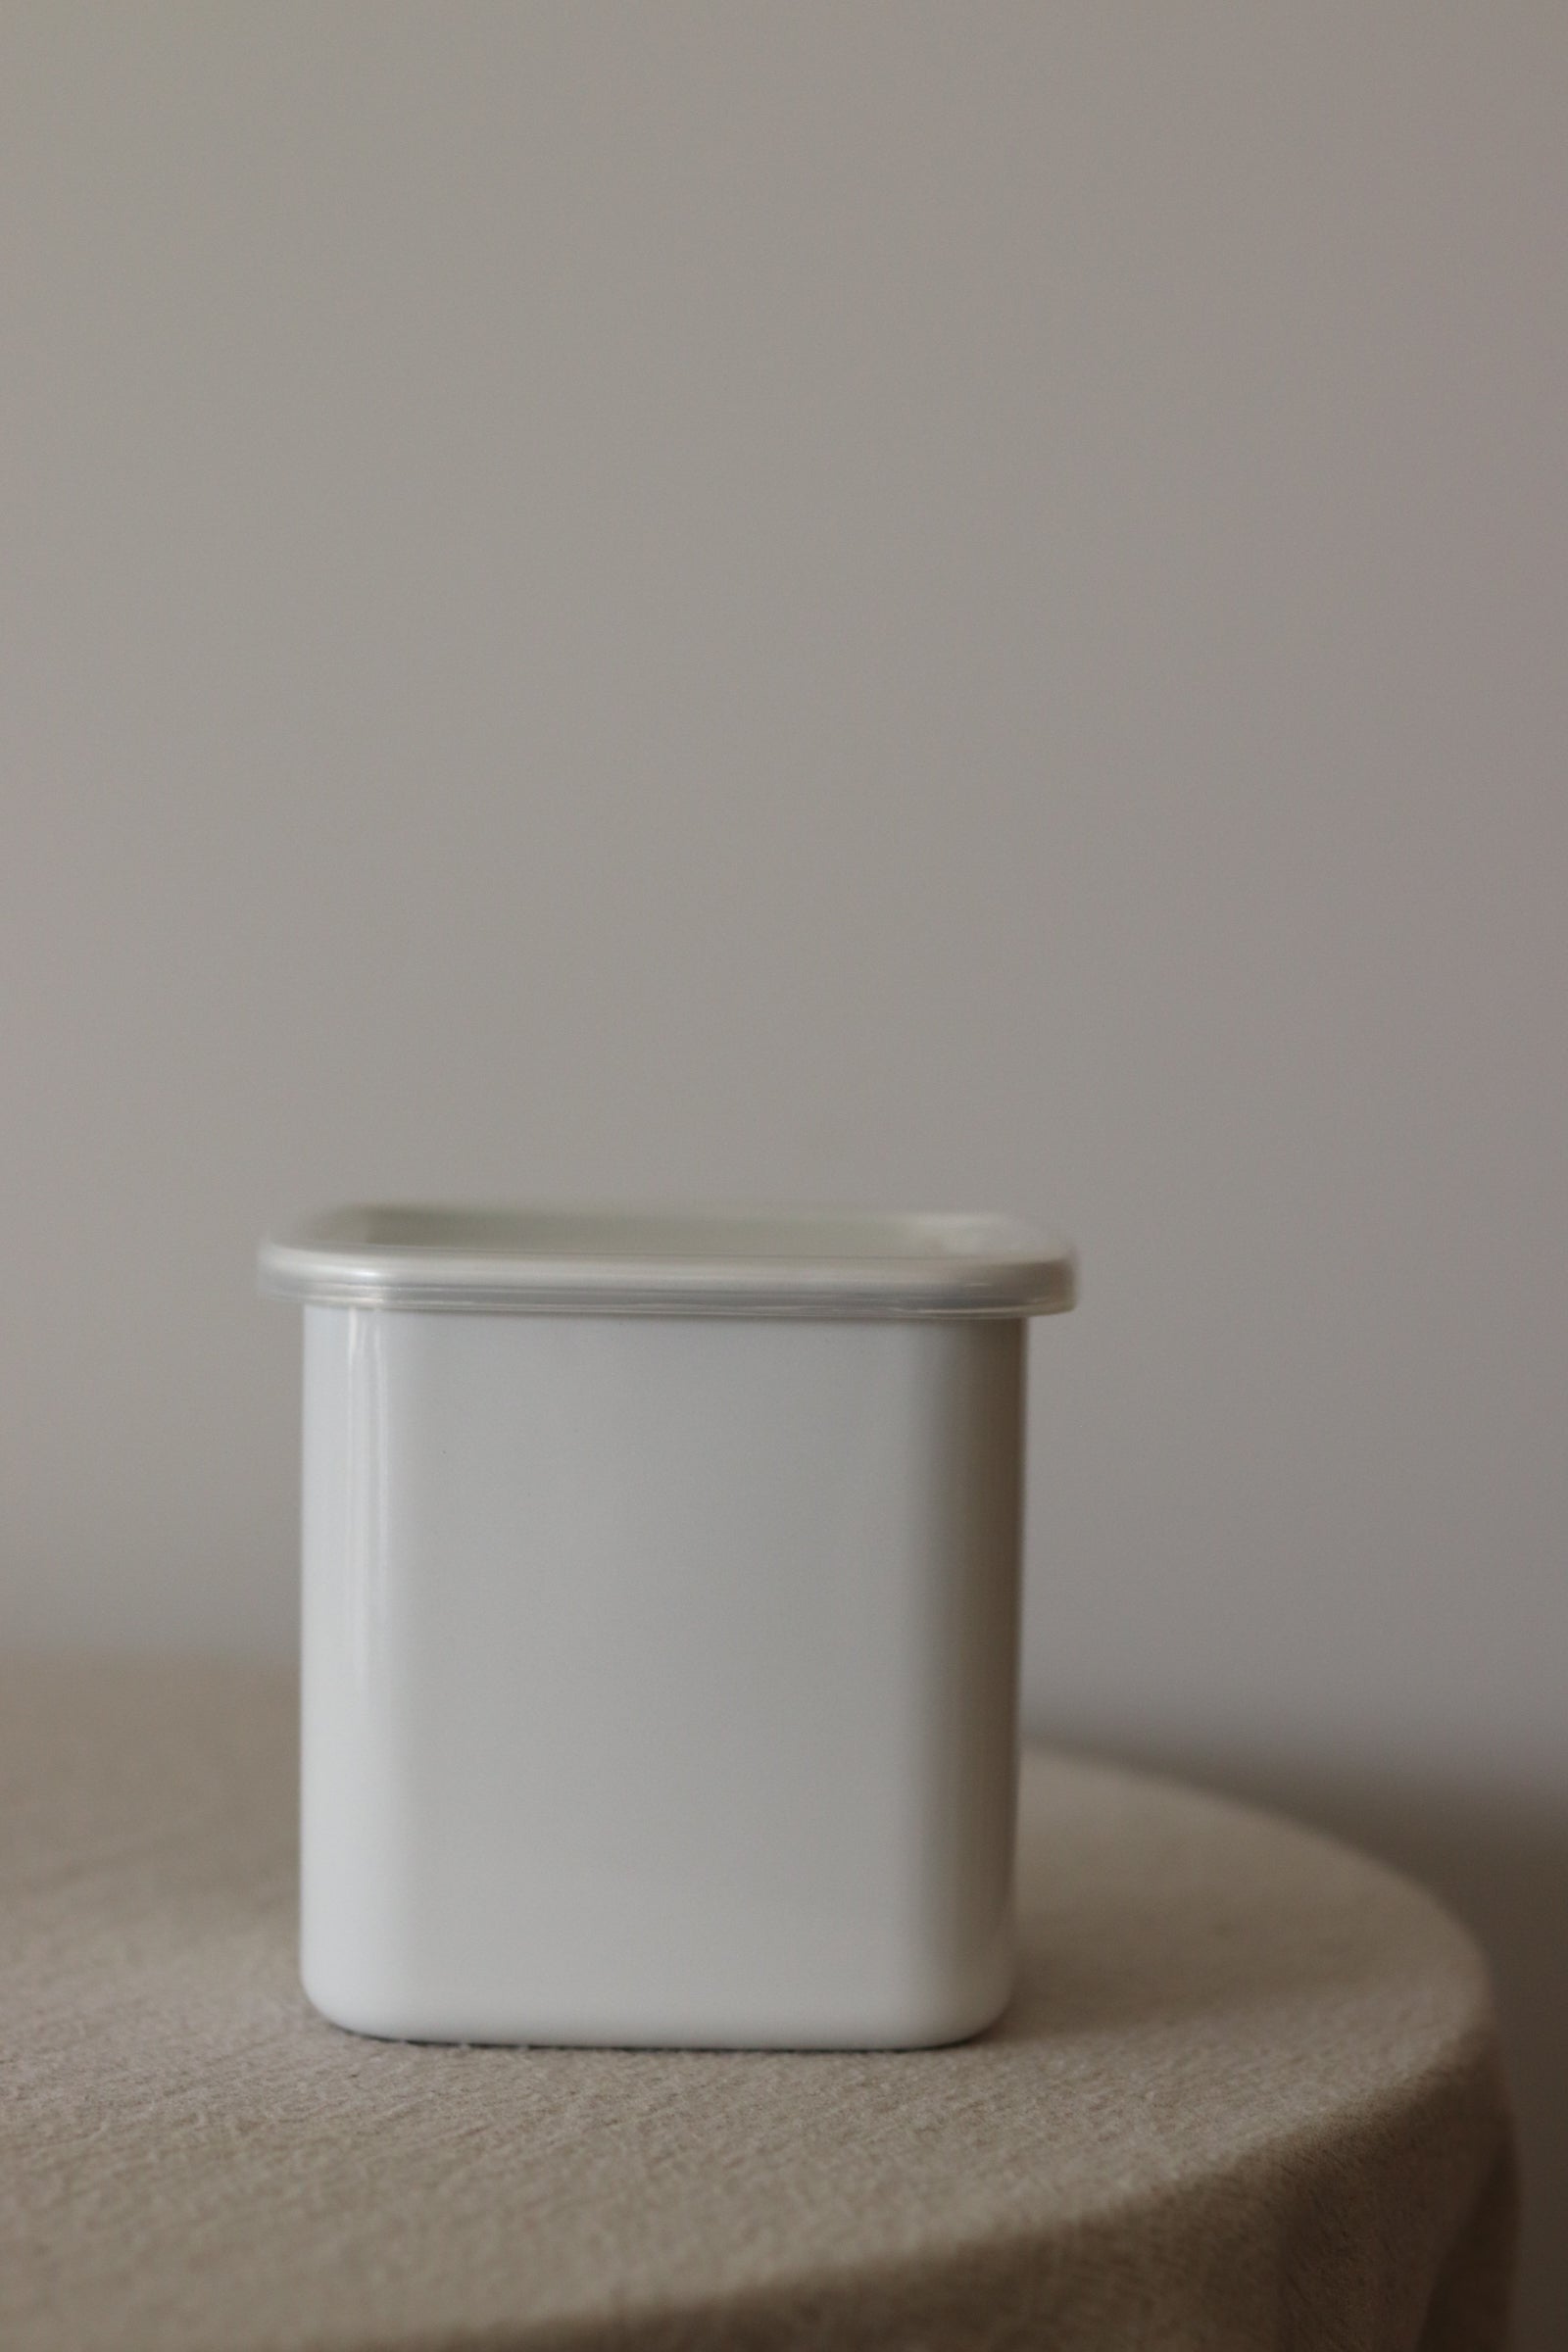 Noda Horo White Series Enamel Square Food Containers